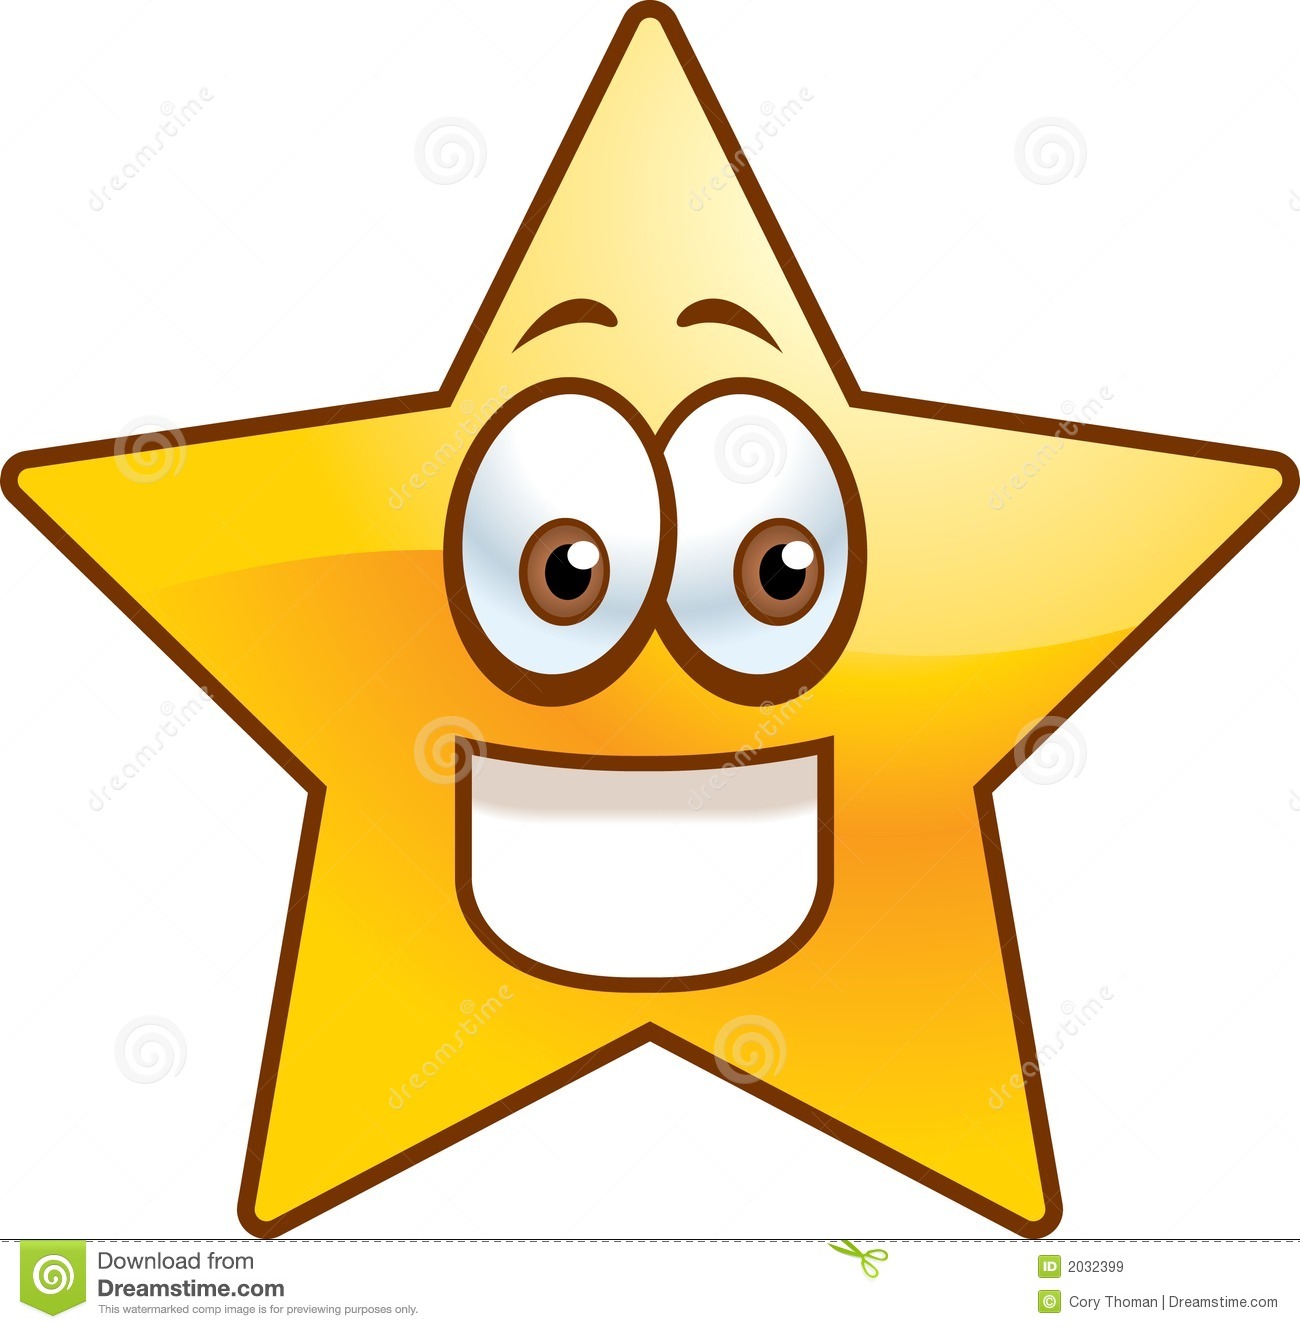 shapes clipart star